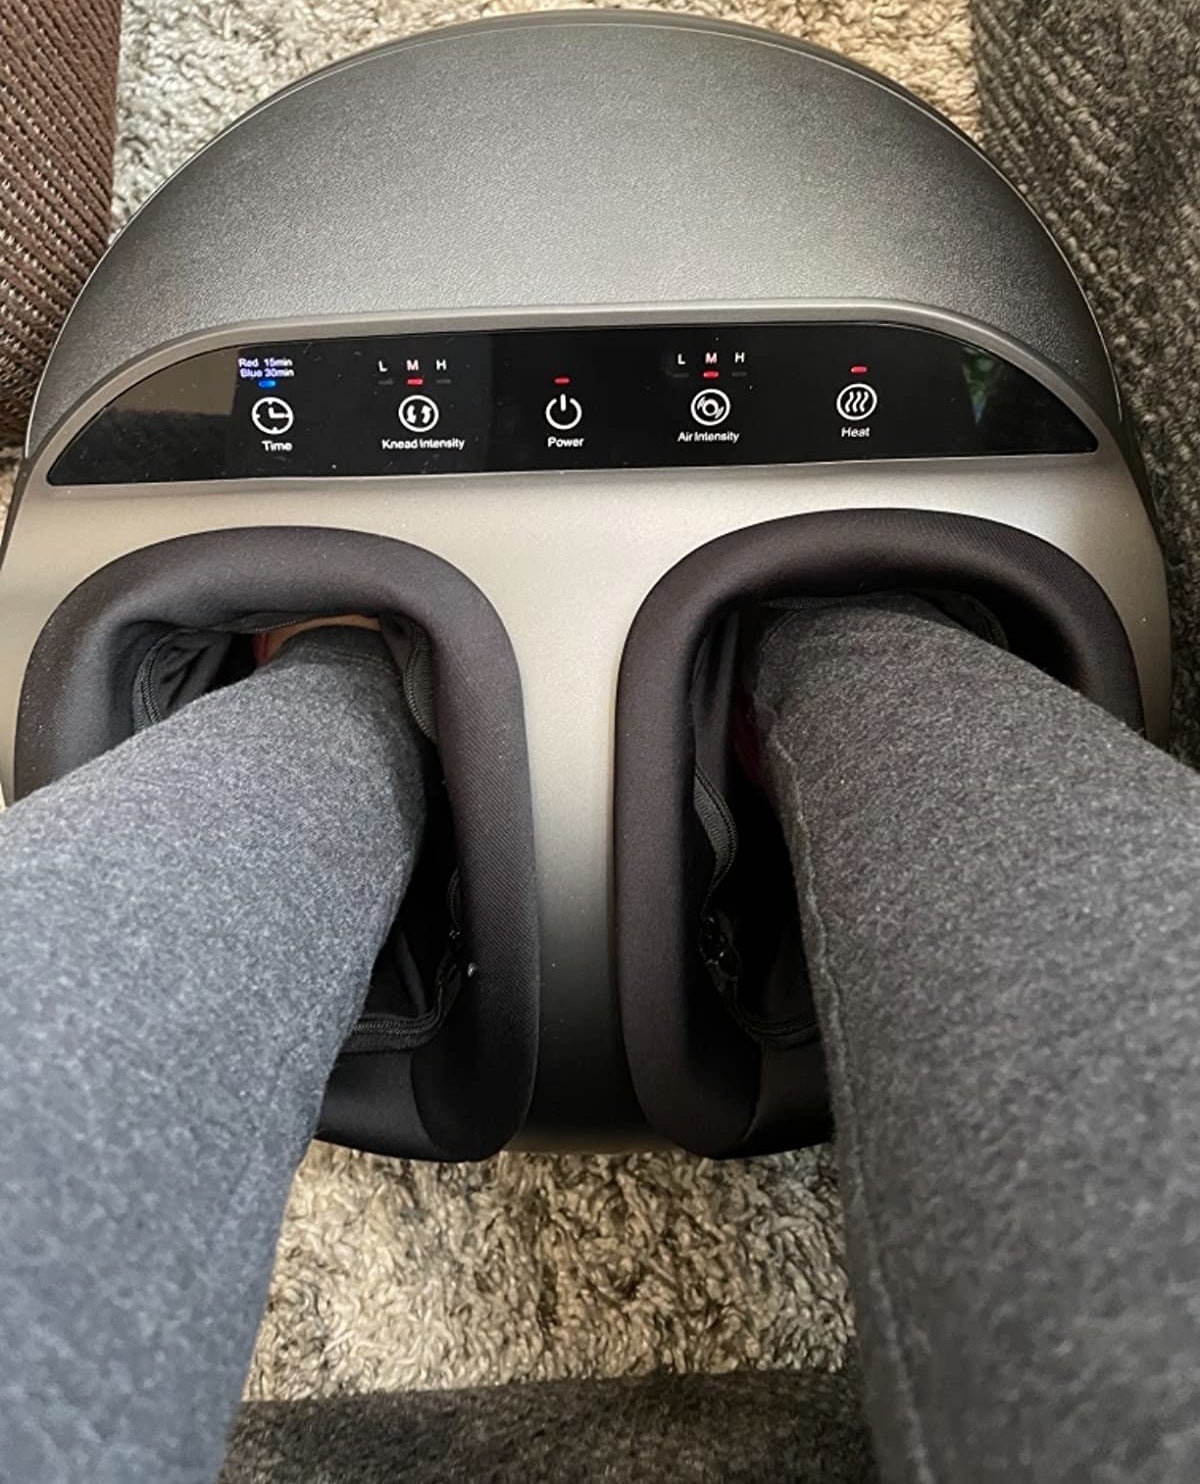 Reviewer using the foot massager